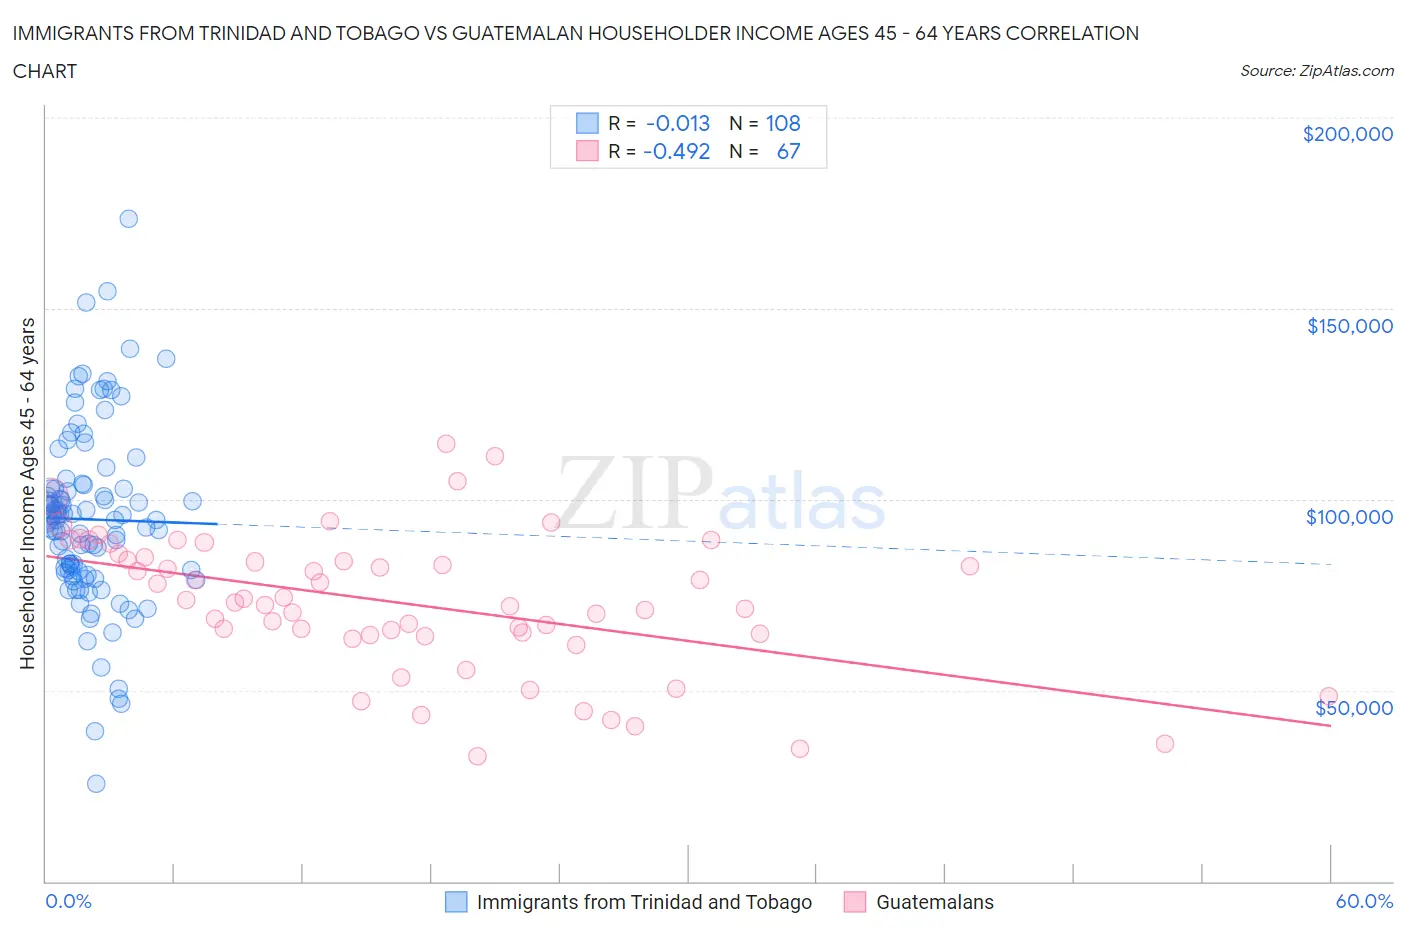 Immigrants from Trinidad and Tobago vs Guatemalan Householder Income Ages 45 - 64 years